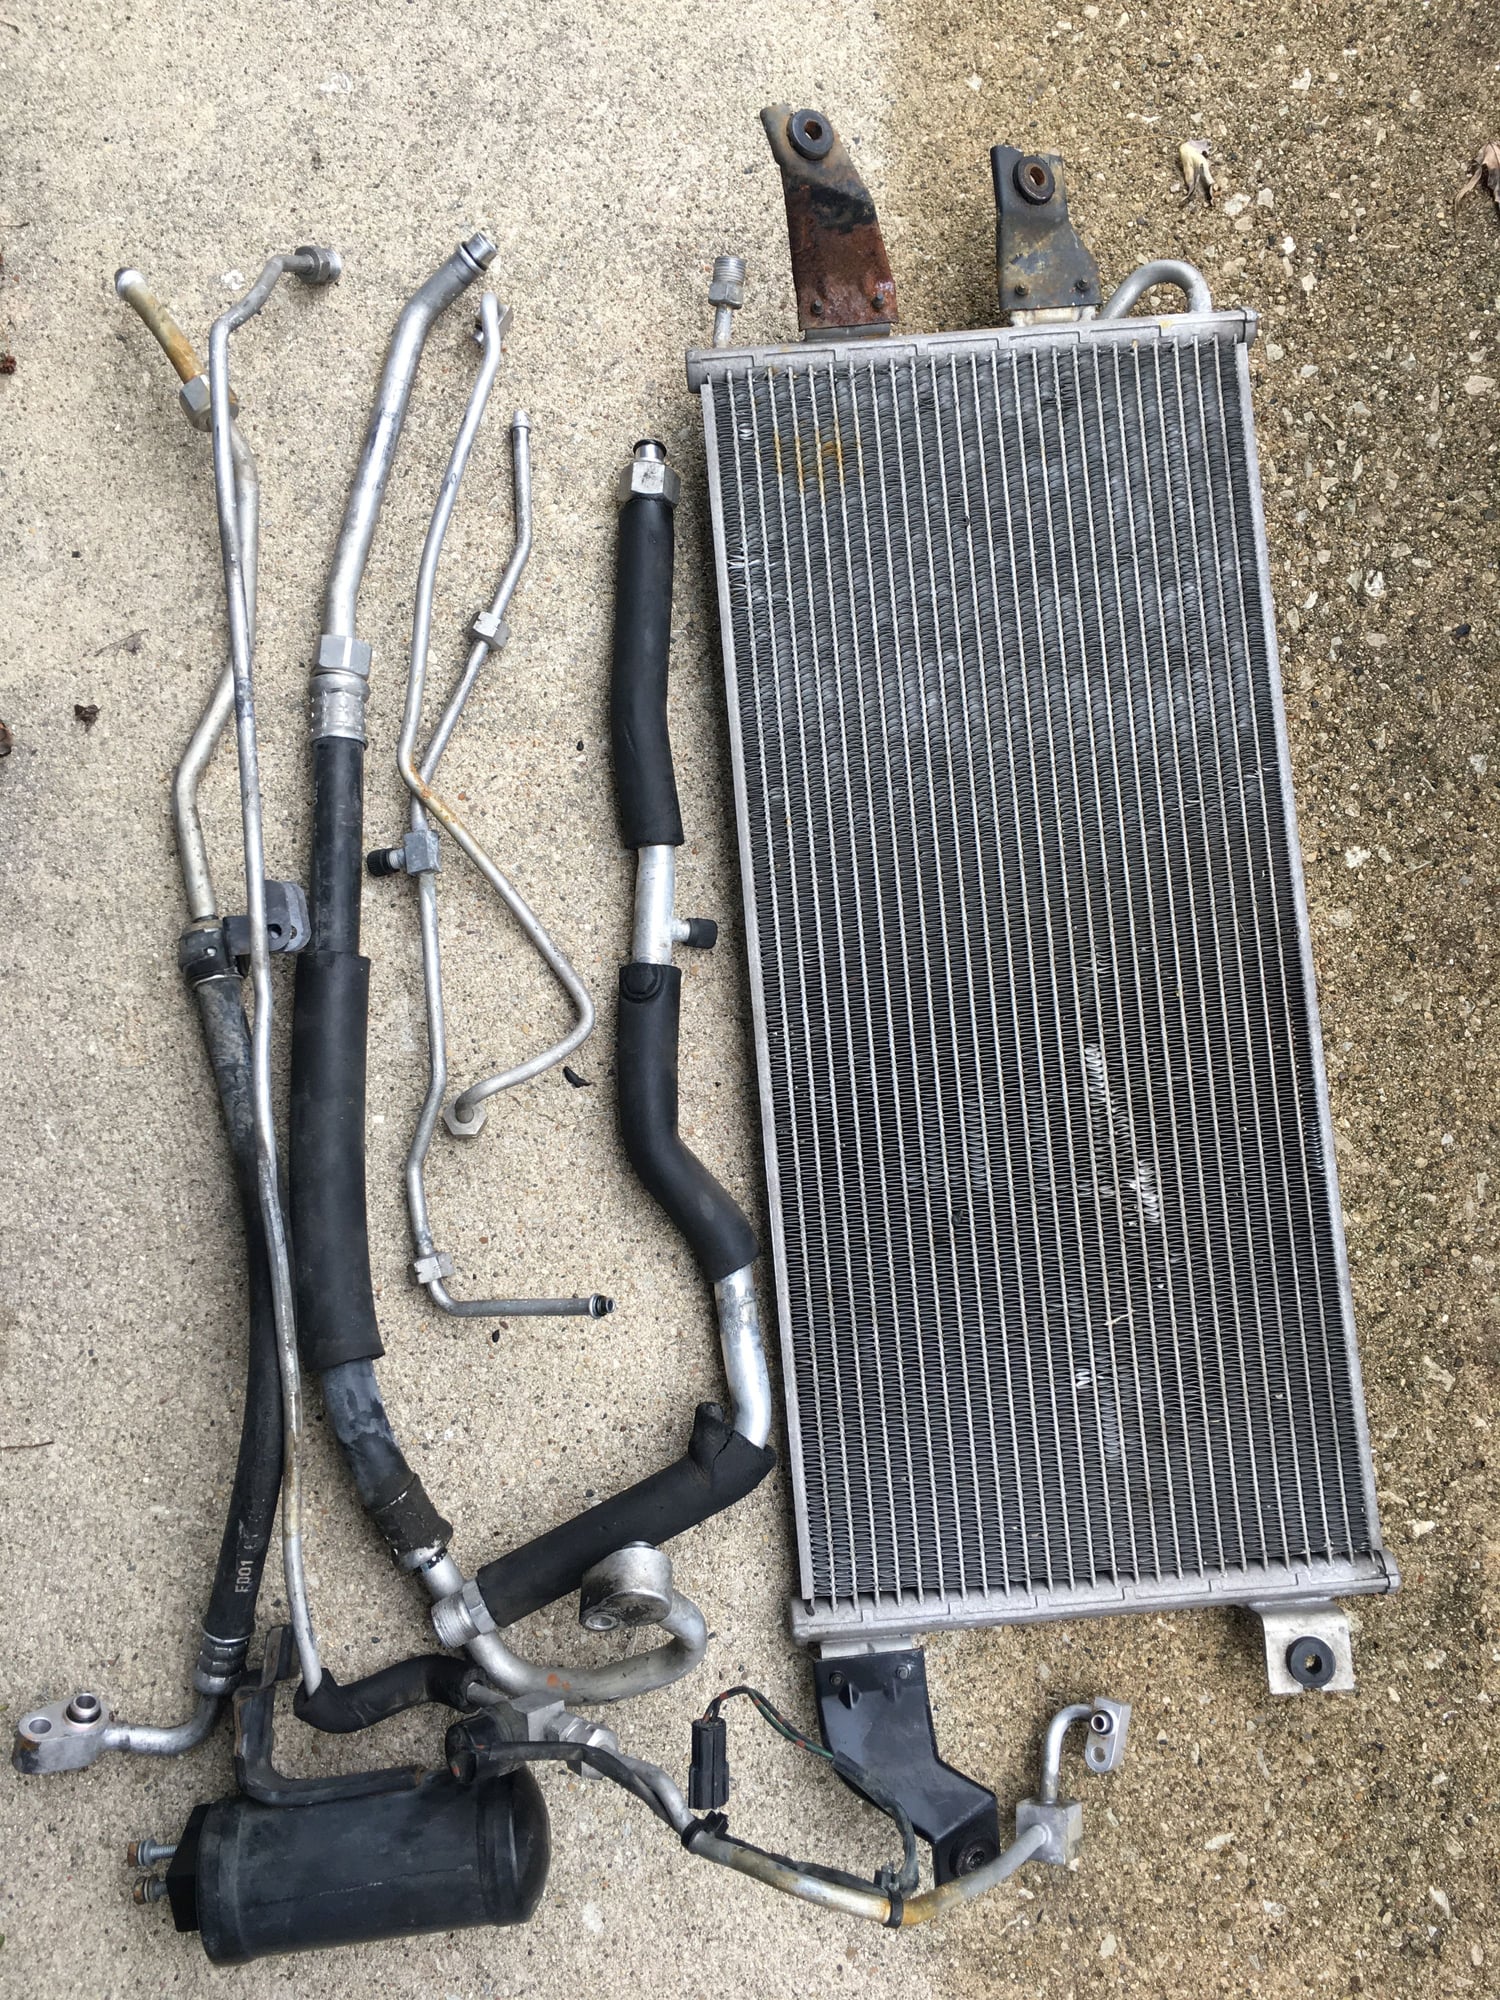 Accessories - MANA AC System - Used - 1993 to 1995 Mazda RX-7 - Chicago, IL 60605, United States